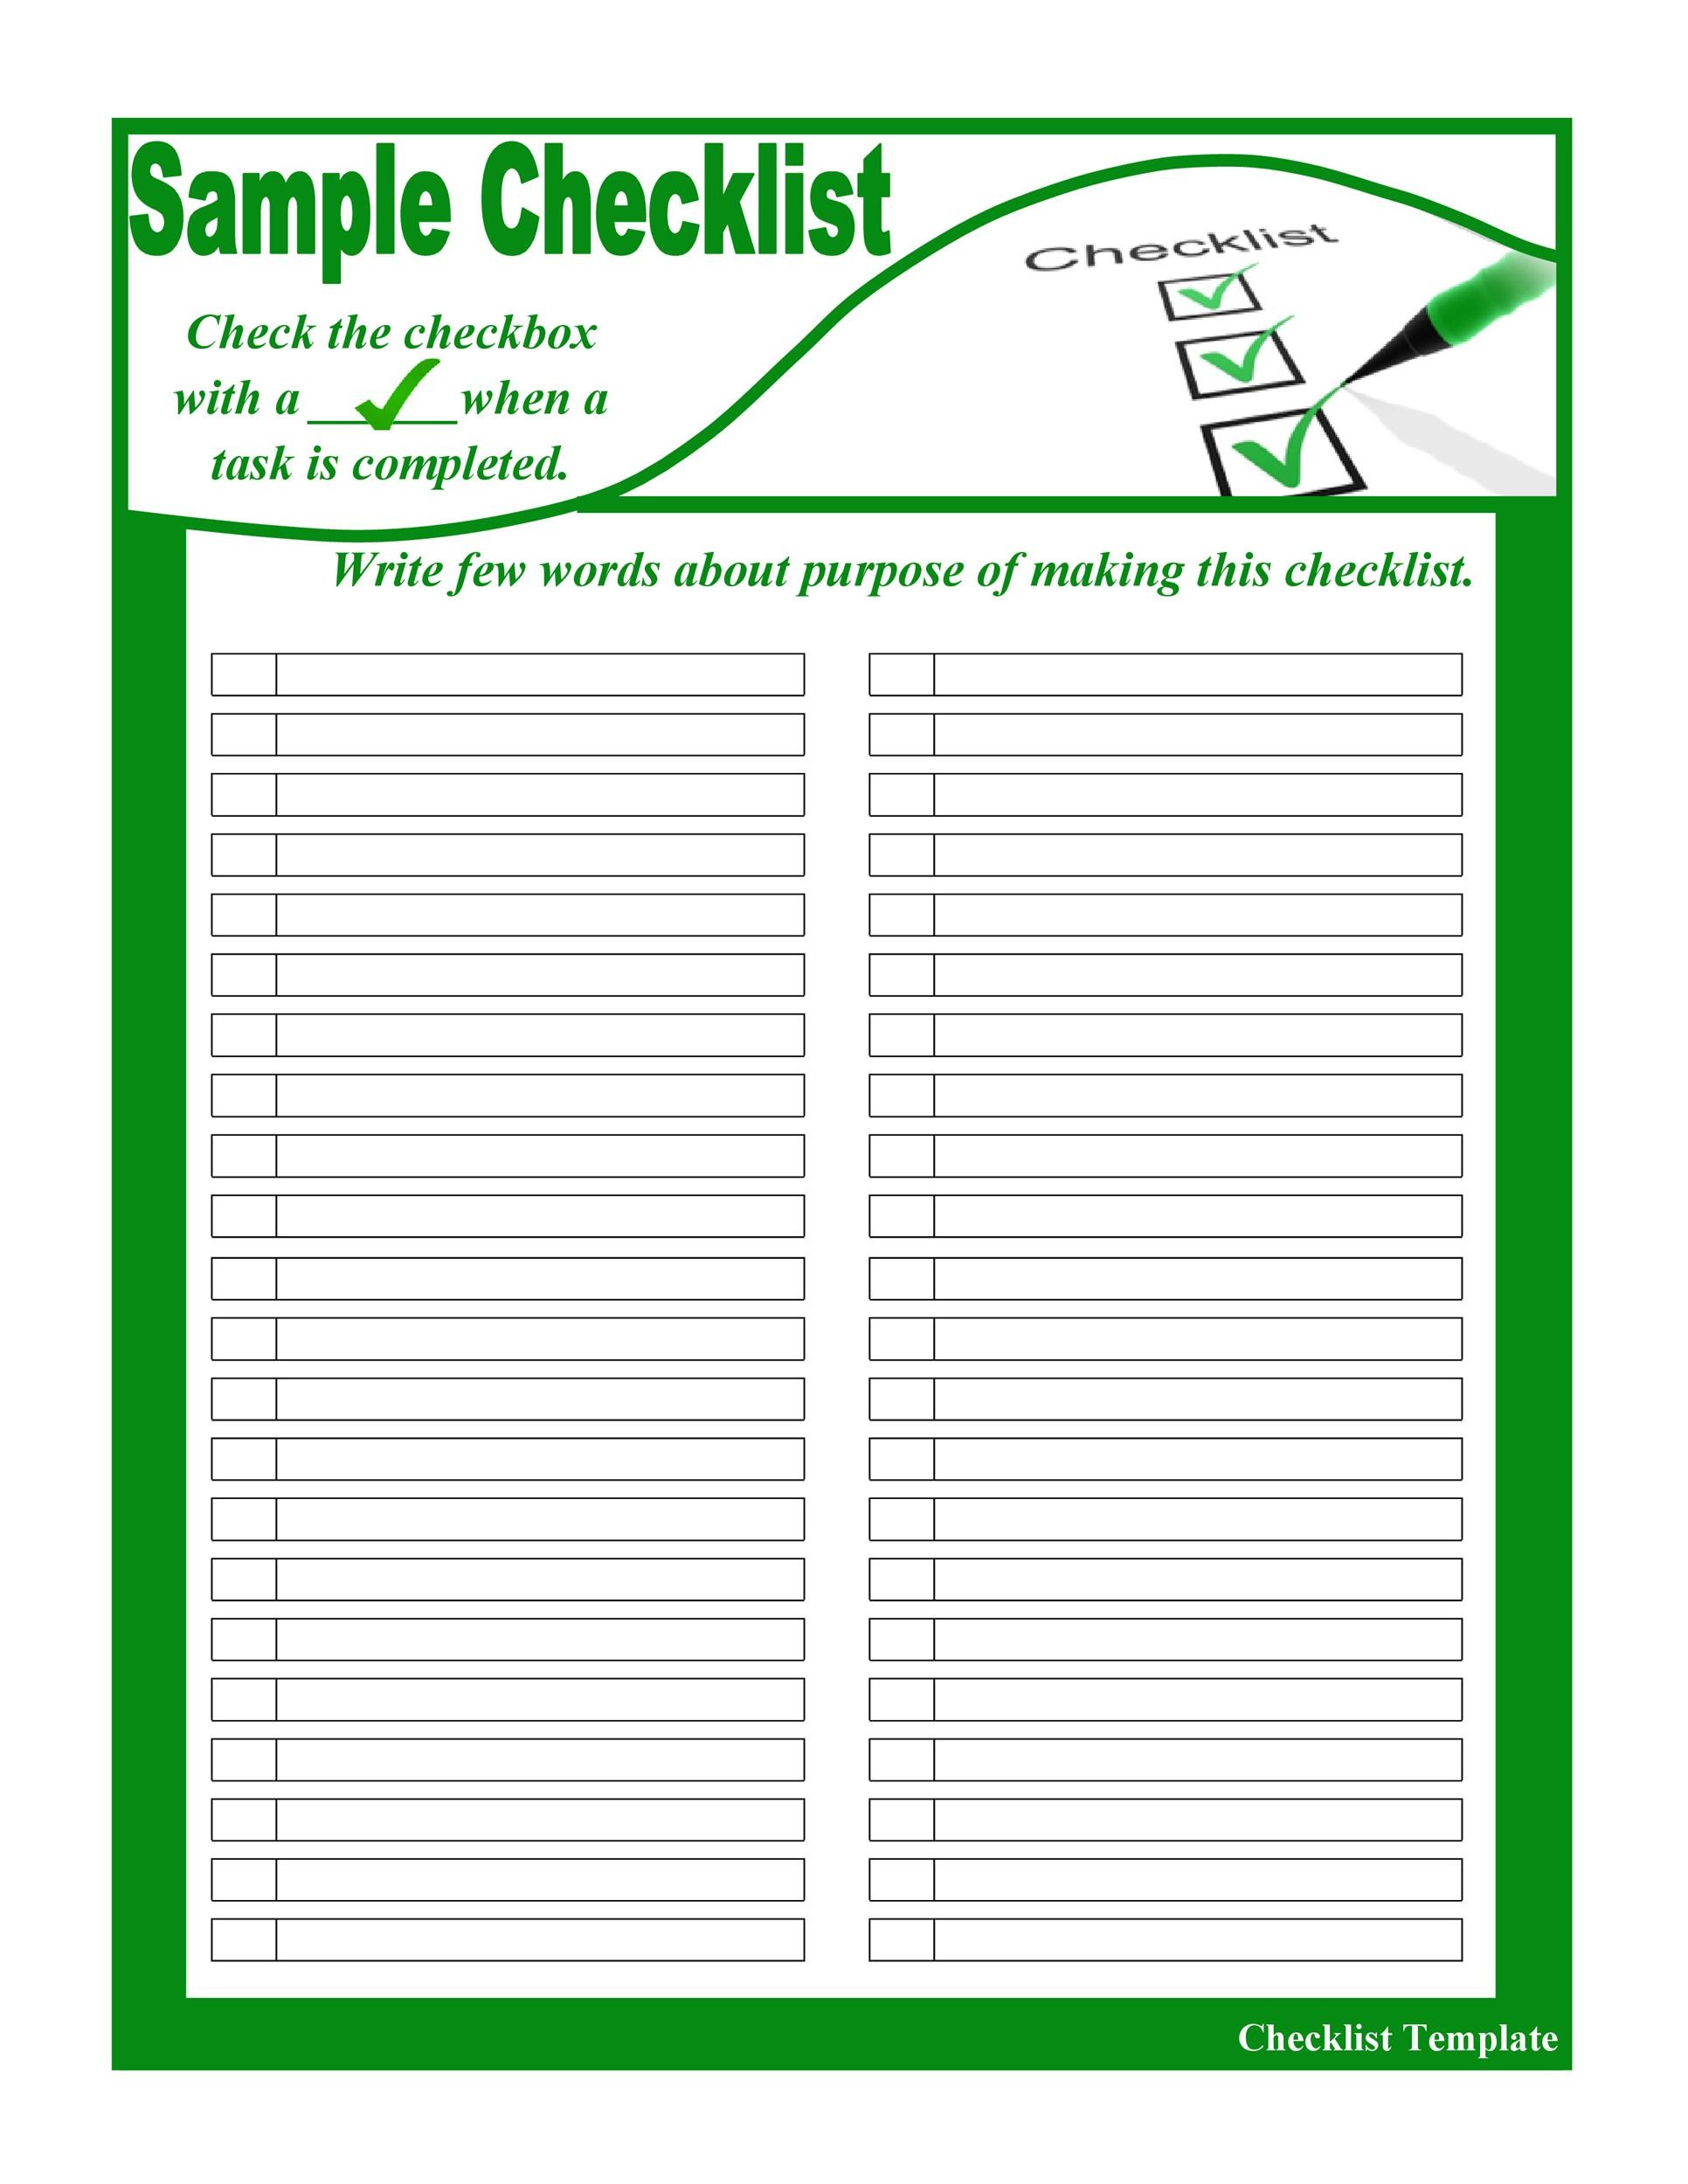 50-printable-to-do-list-checklist-templates-excel-word-5-best-images